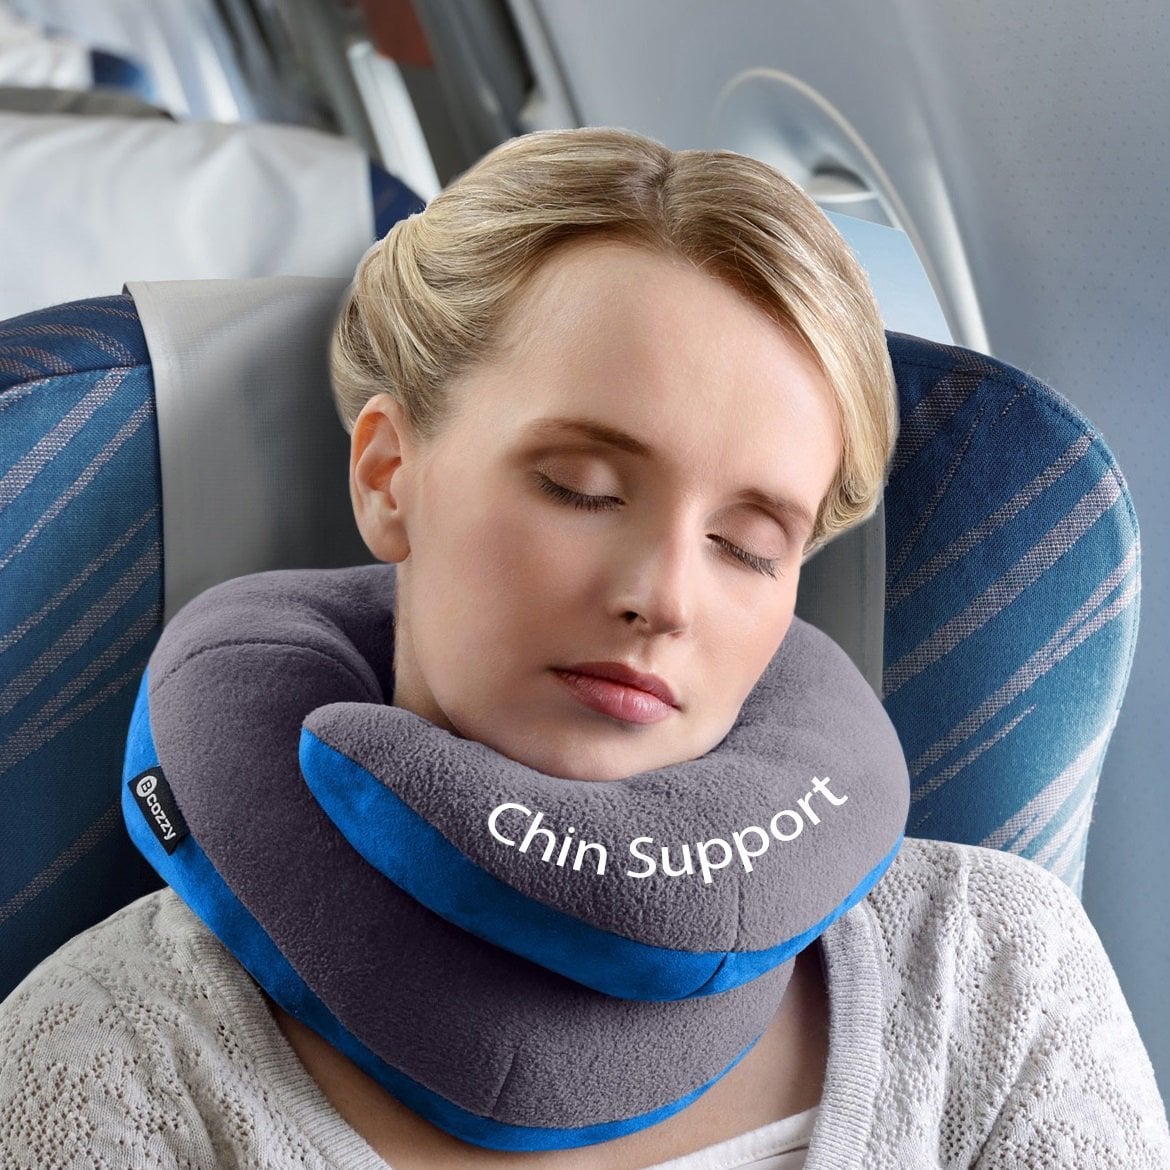 or at Home Easy to Carry Car senya Comfort Travel Pillow Cute Llama Blue Cactus Memory Foam Neck Pillow with Comfortable & Breathable Cover Relax and Sleep for Airplane Travel Office